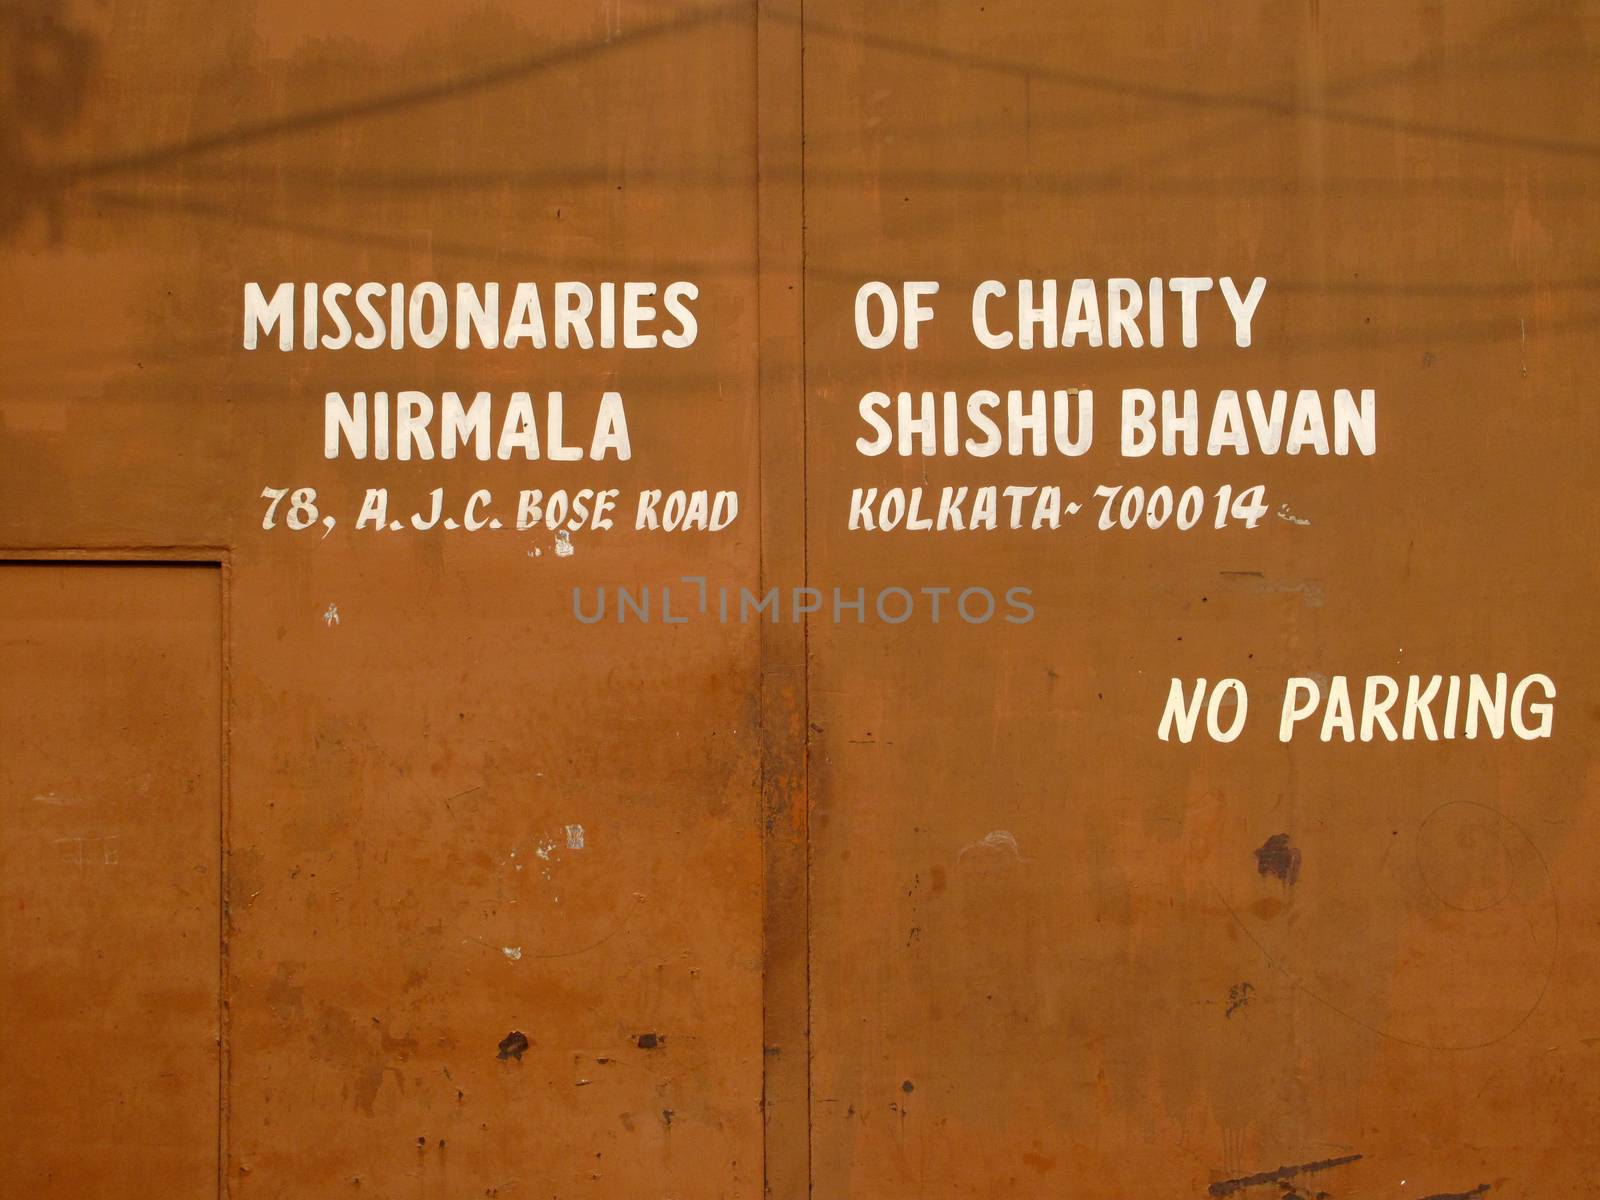 The inscription at the entrance to Shishu Bhavan, one of the houses established by Mother Teresa and run by the Missionaries of Charity in Kolkata, India on January 23, 2009.